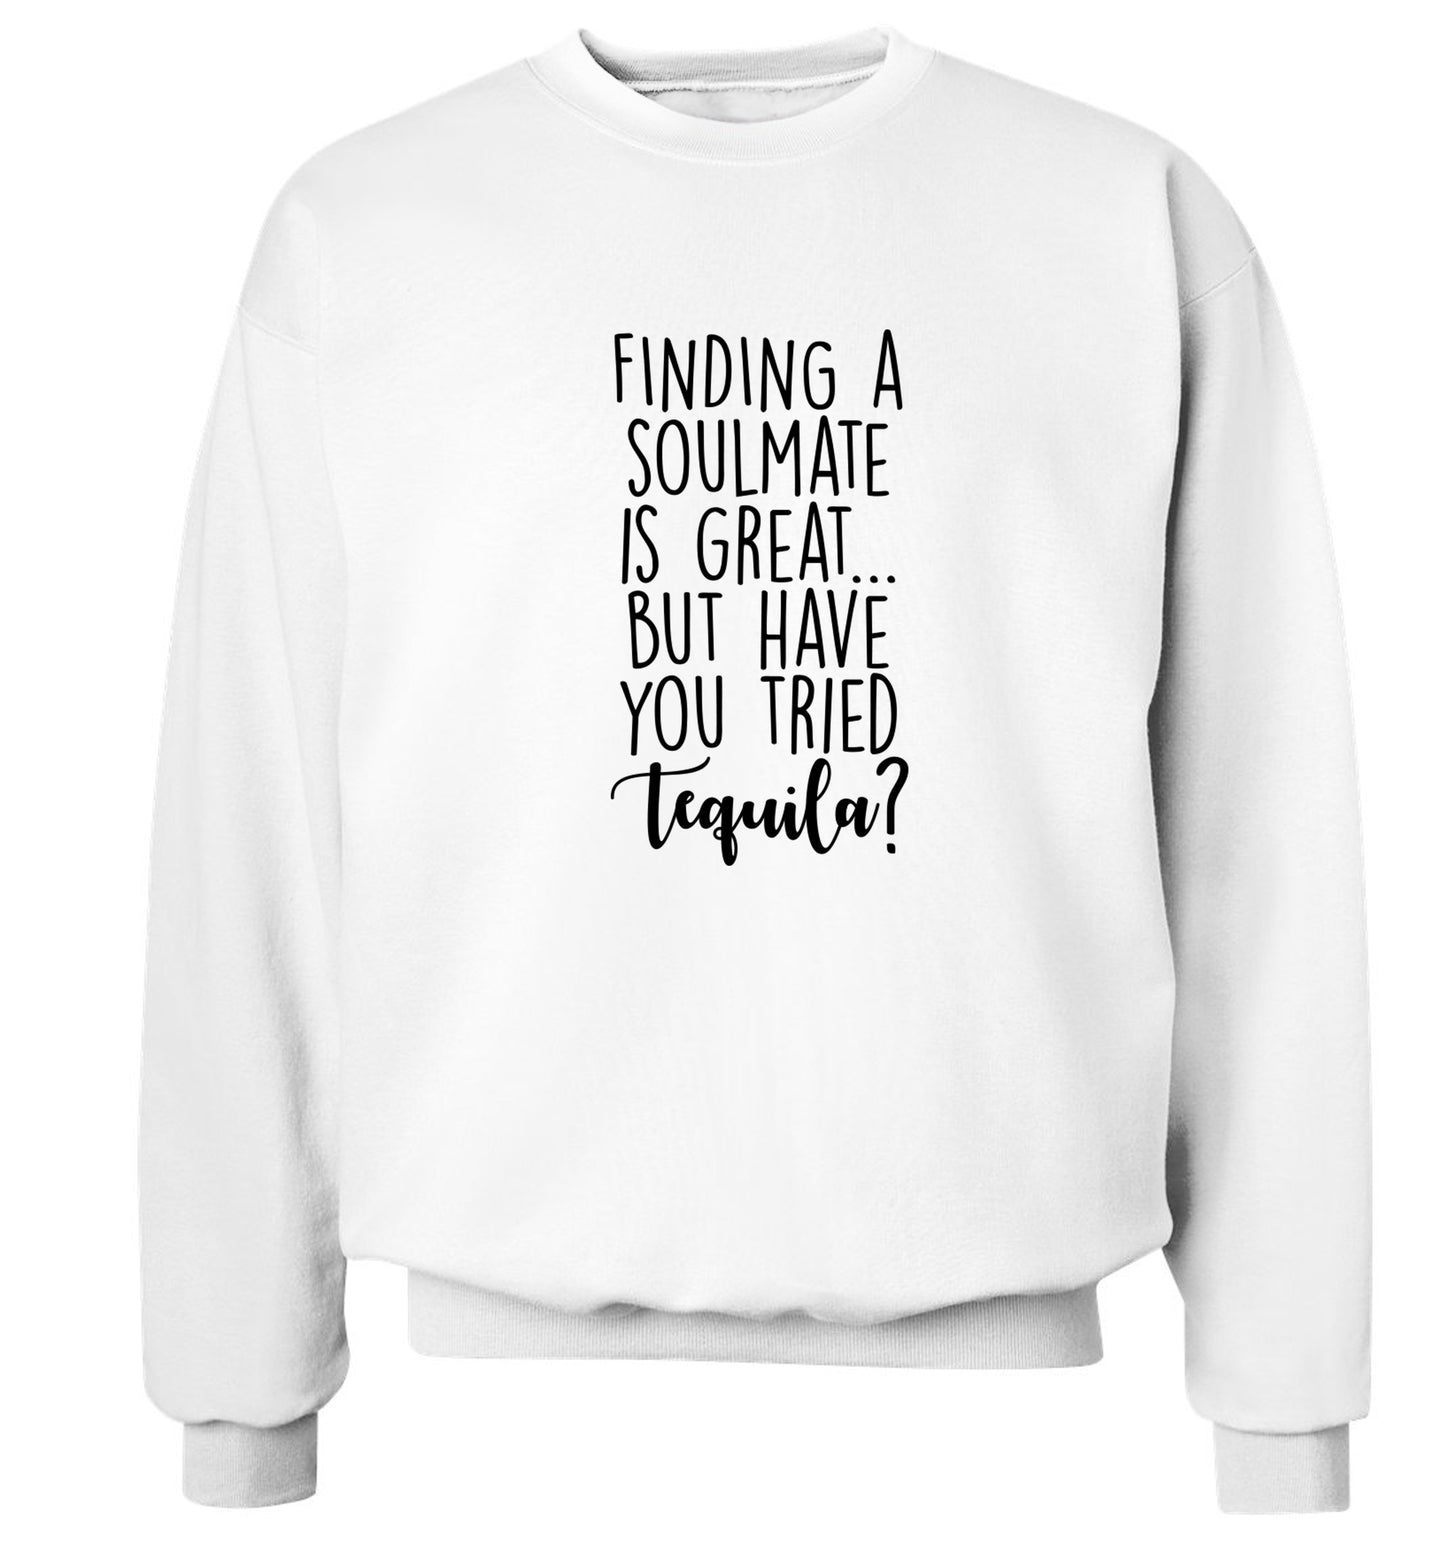 Finding a soulmate is great but have you tried tequila? Adult's unisex white Sweater 2XL